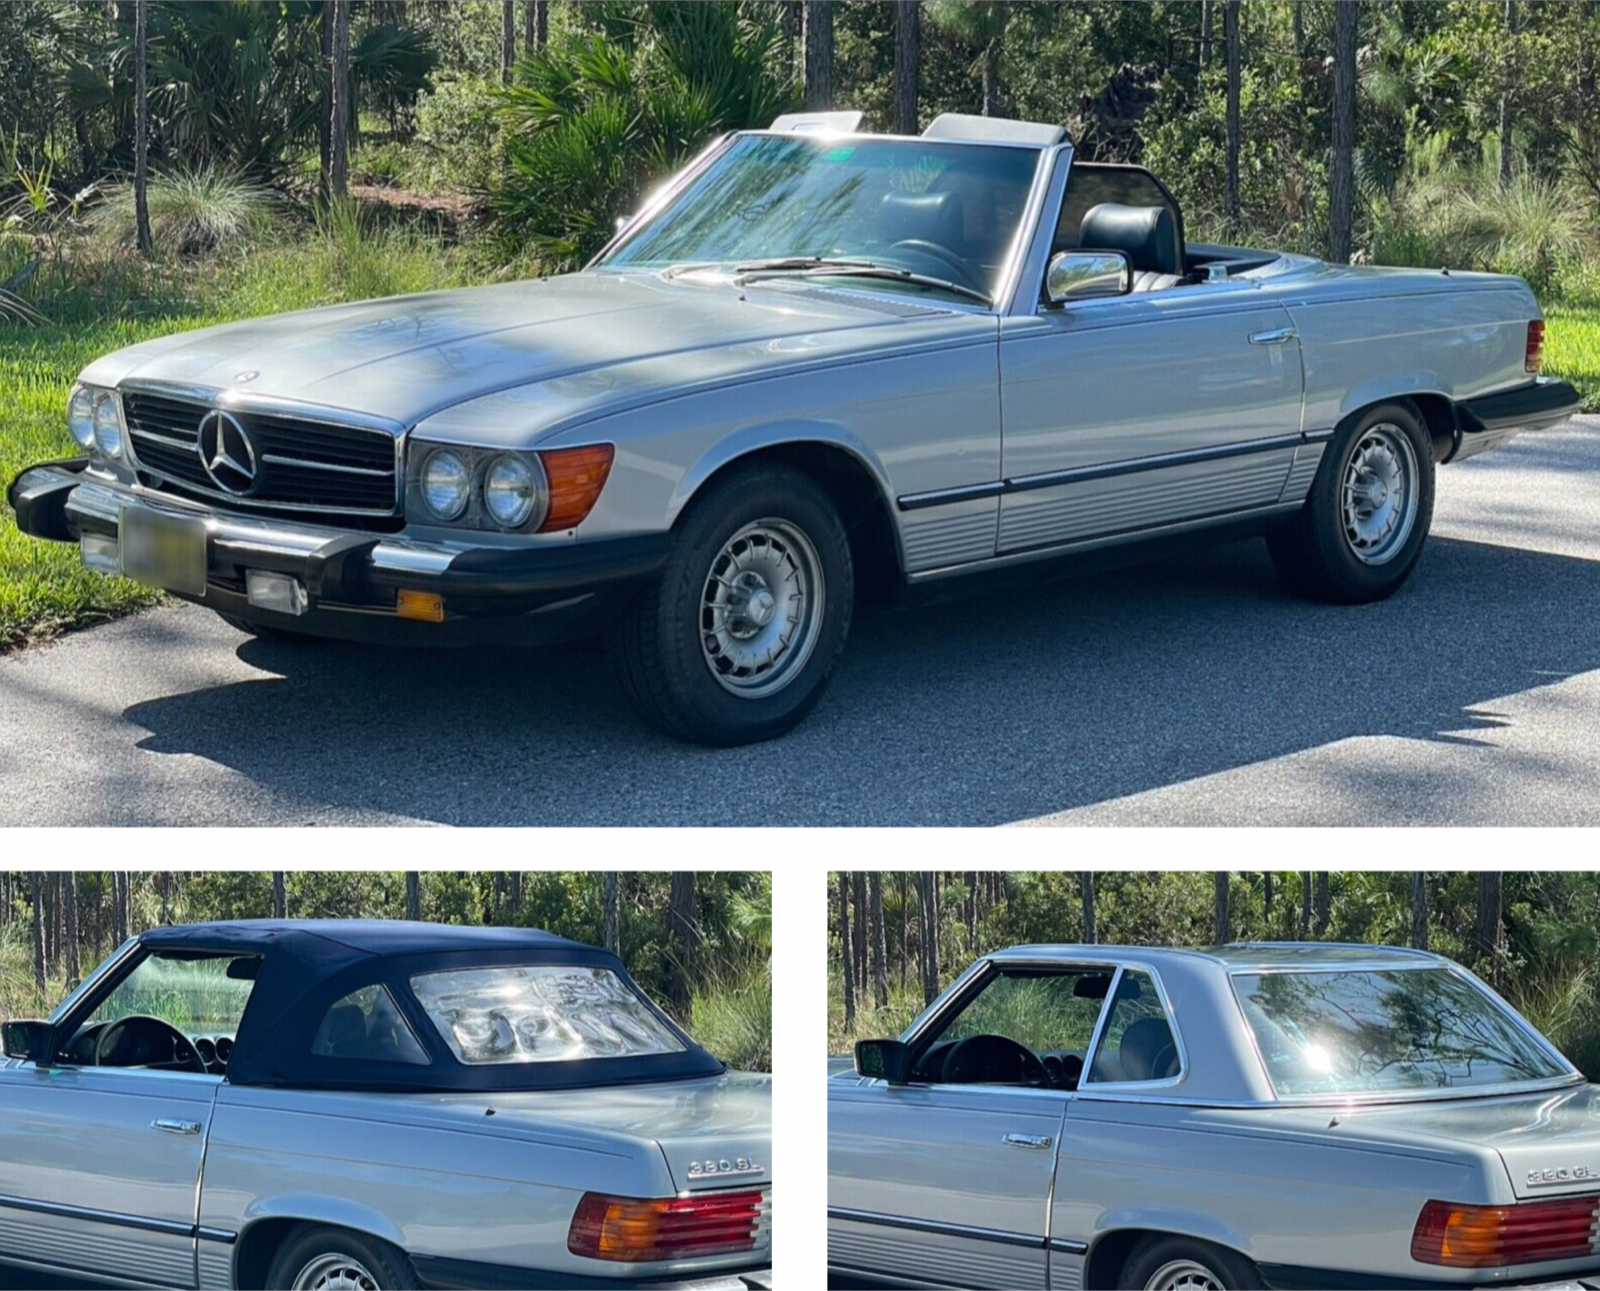 1984 Mercedes-Benz 380SL. Very well maintained. Starts and drives like new!